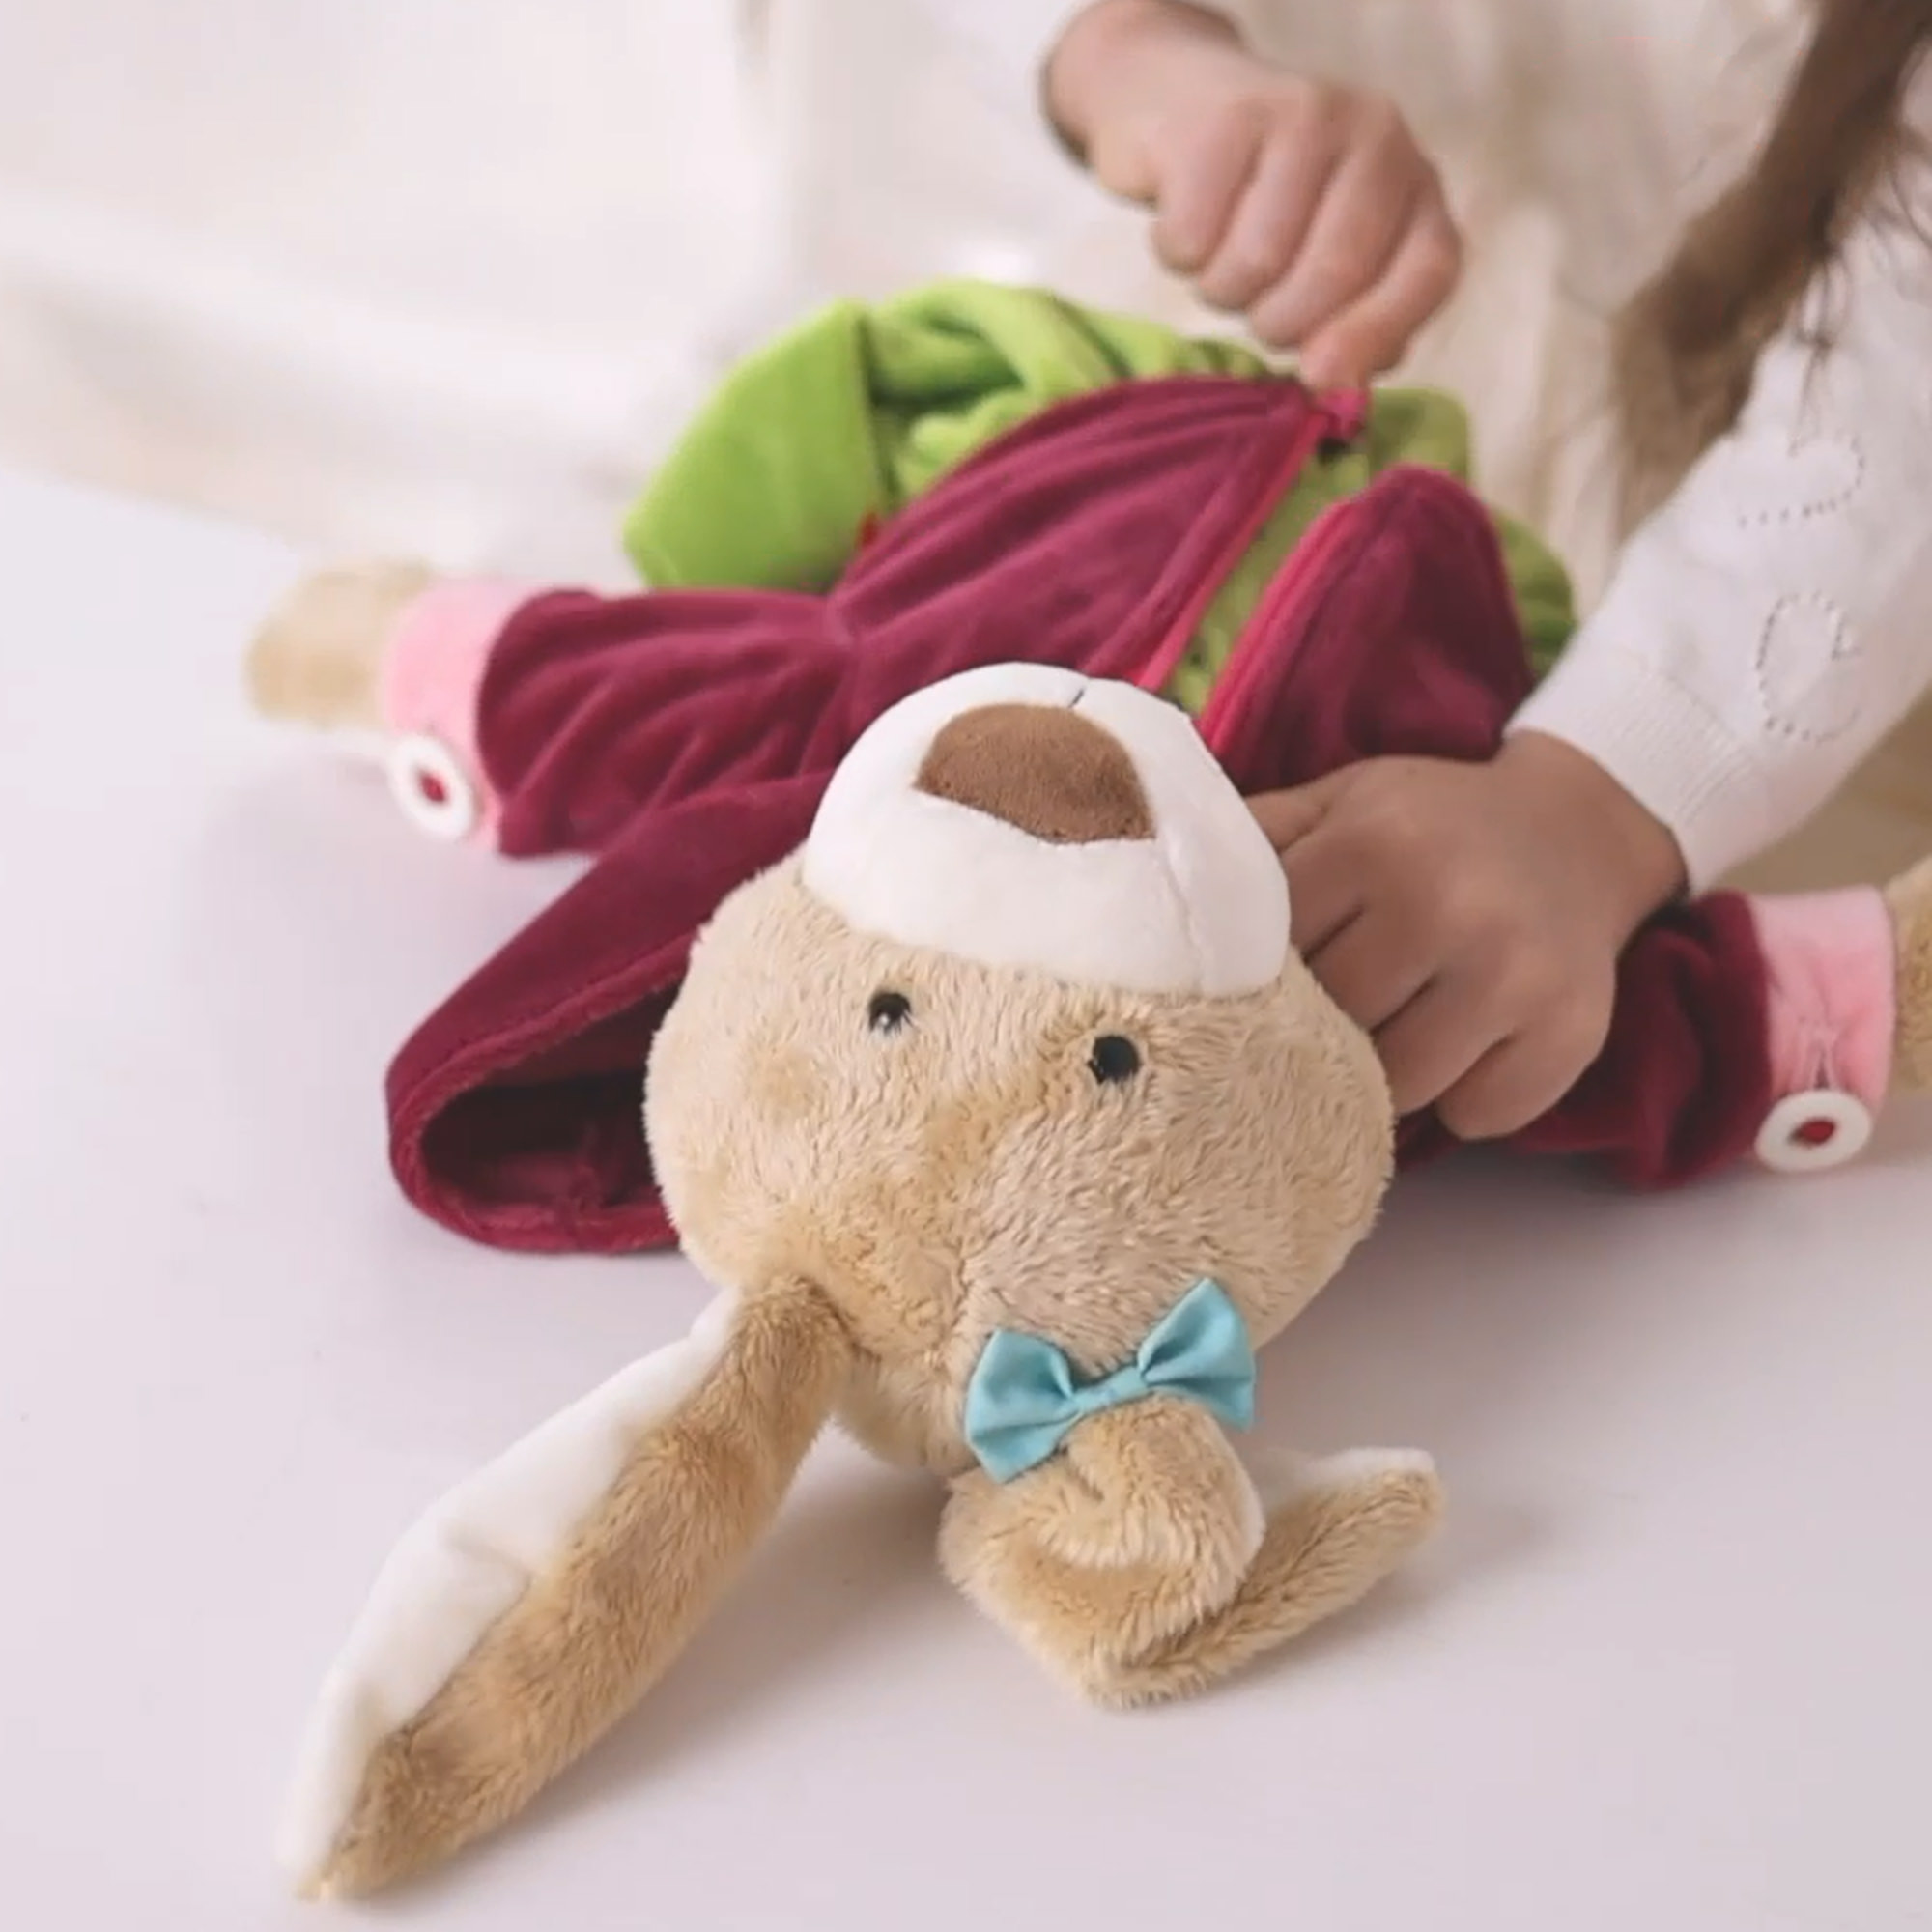 Learn-how-to-dress plush bunny